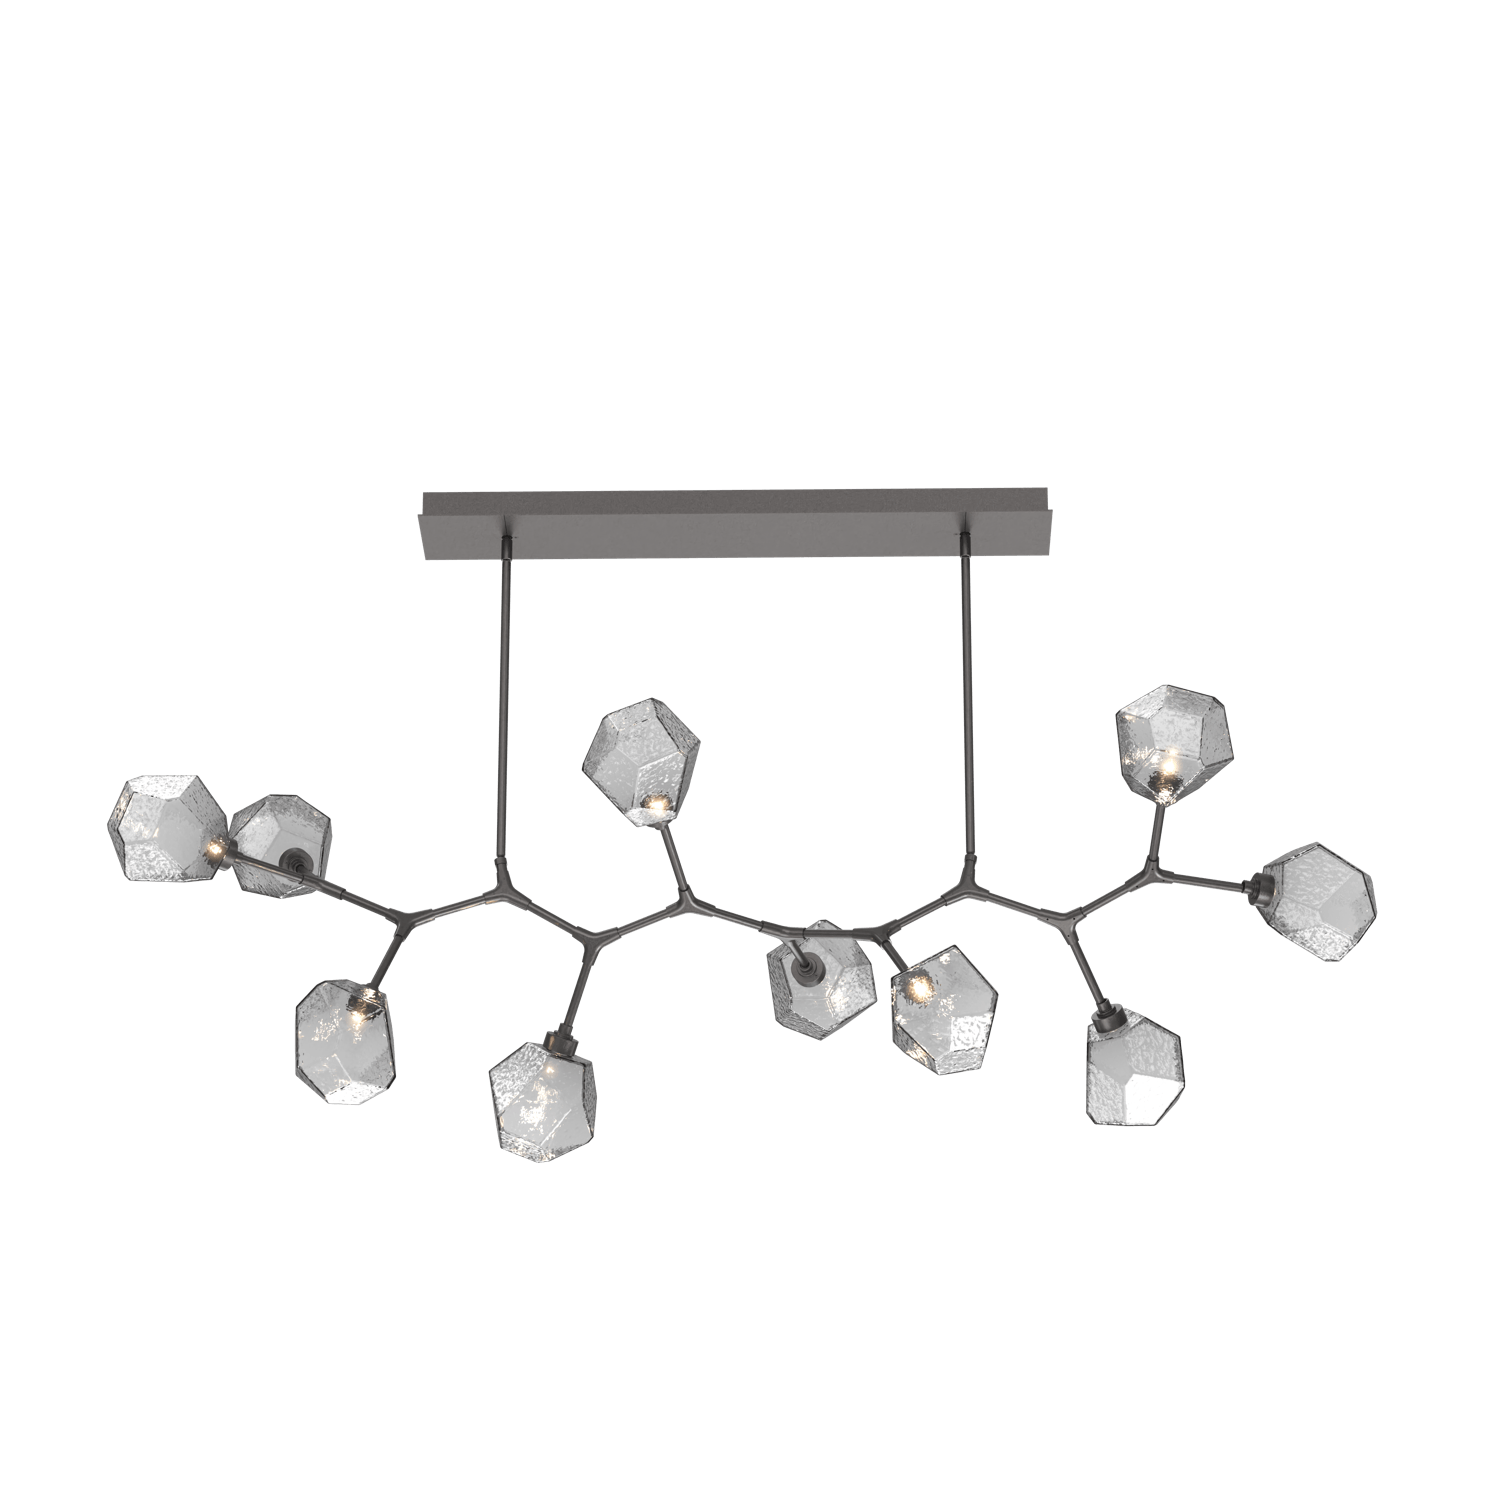 PLB0039-BC-GP-S-Hammerton-Studio-Gem-10-light-modern-branch-chandelier-with-graphite-finish-and-smoke-blown-glass-shades-and-LED-lamping